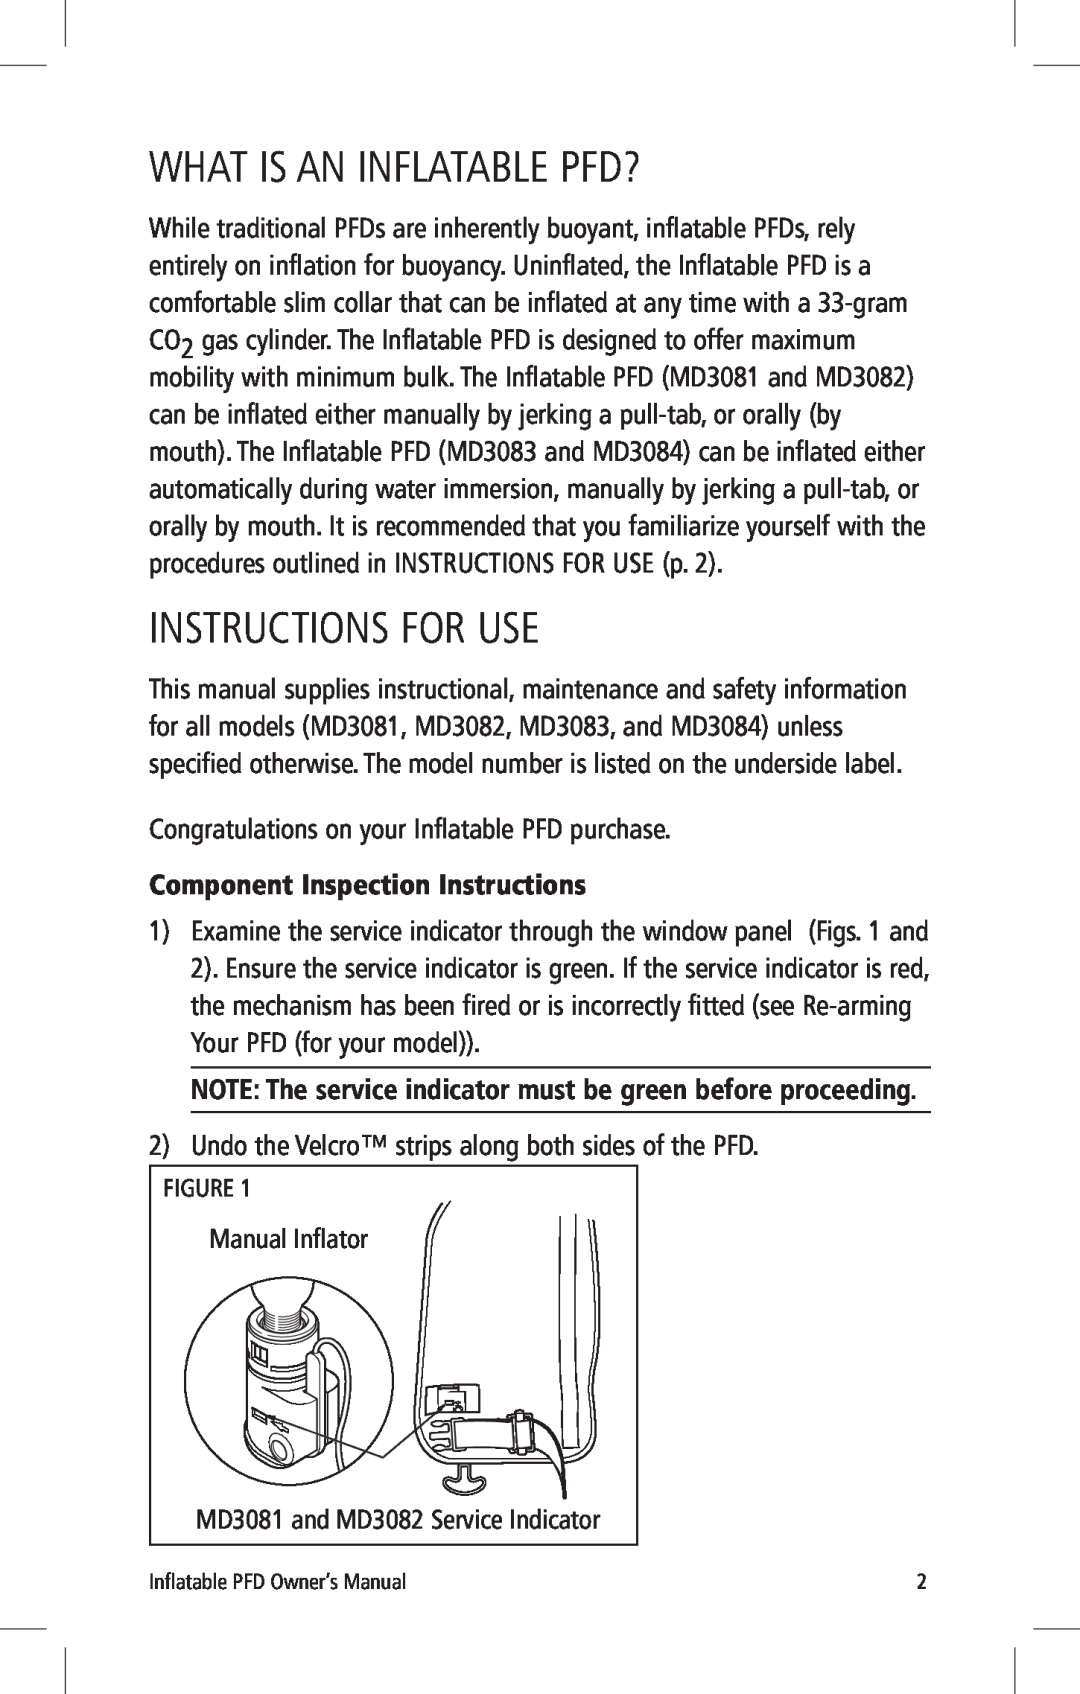 Mustang Survival MD3083, MD3084, MD3082 What Is An Inflatable Pfd?, Instructions For Use, Component Inspection Instructions 